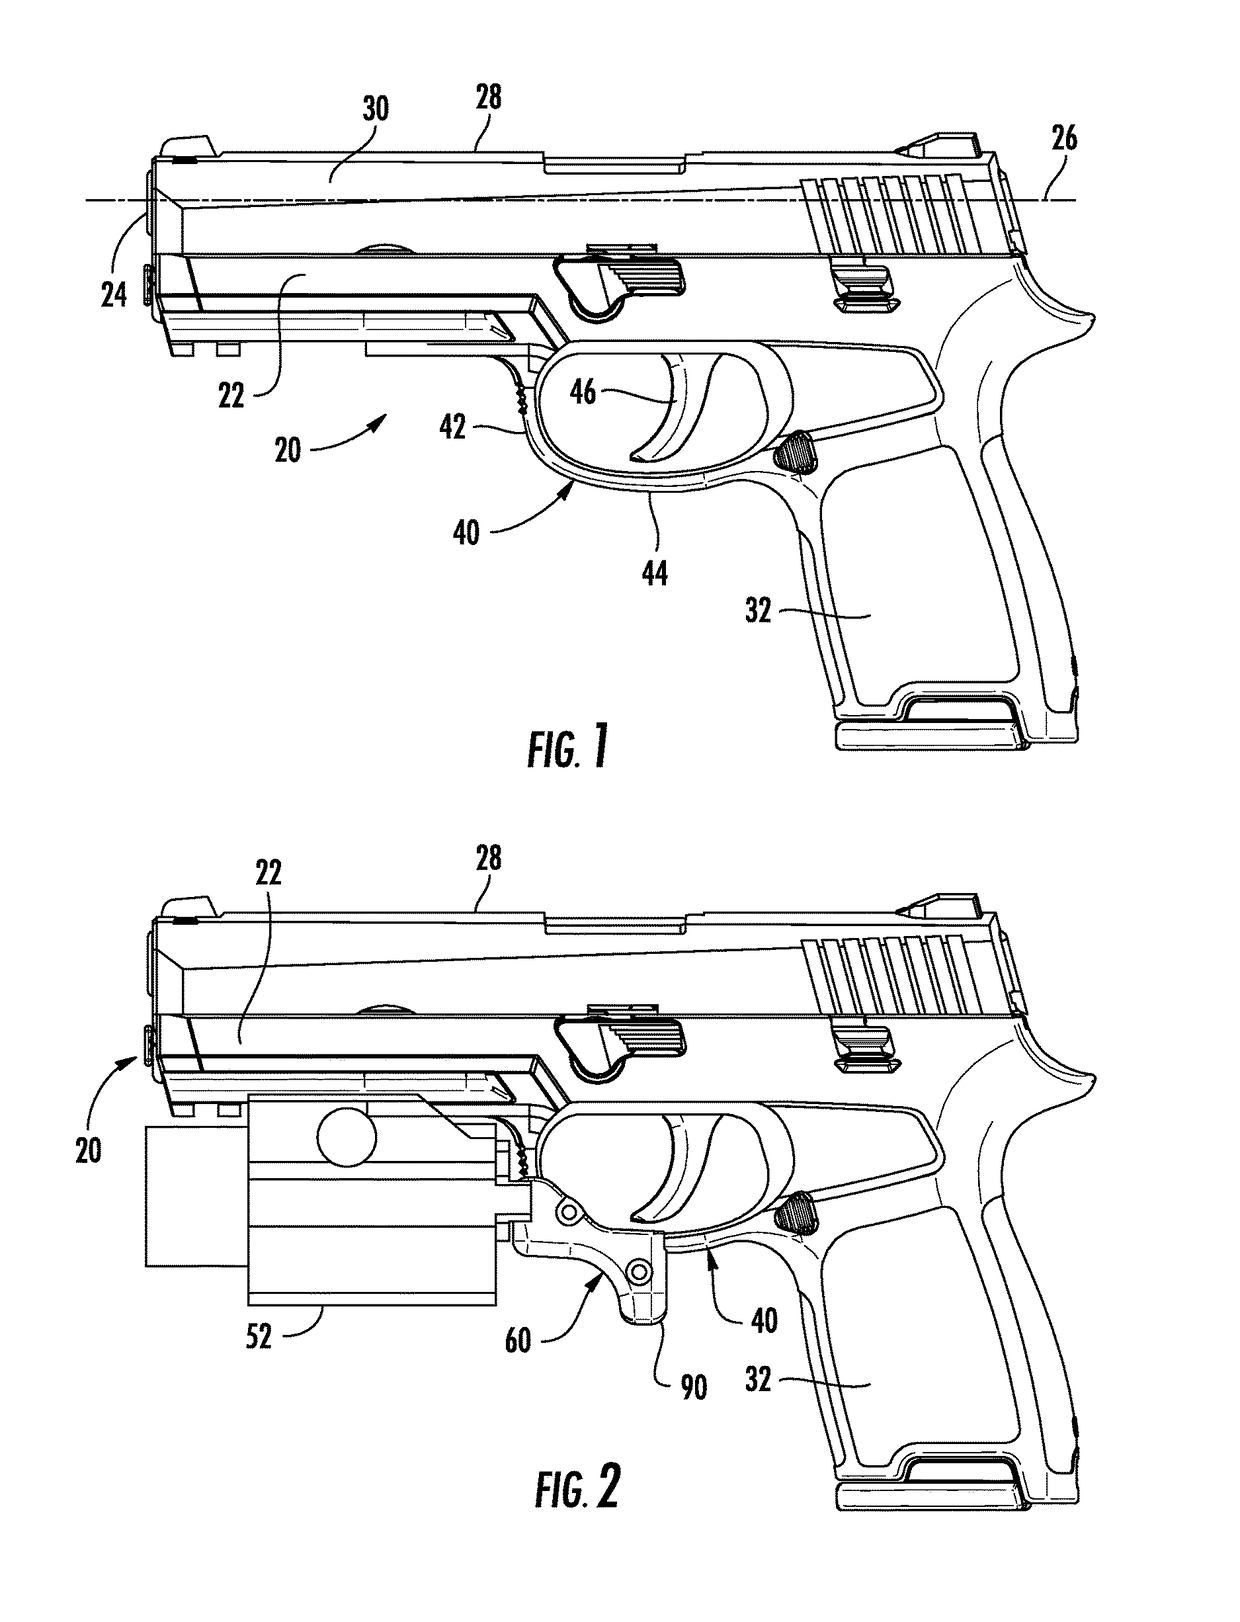 Handgun with Trigger Guard Attachment, and Holster